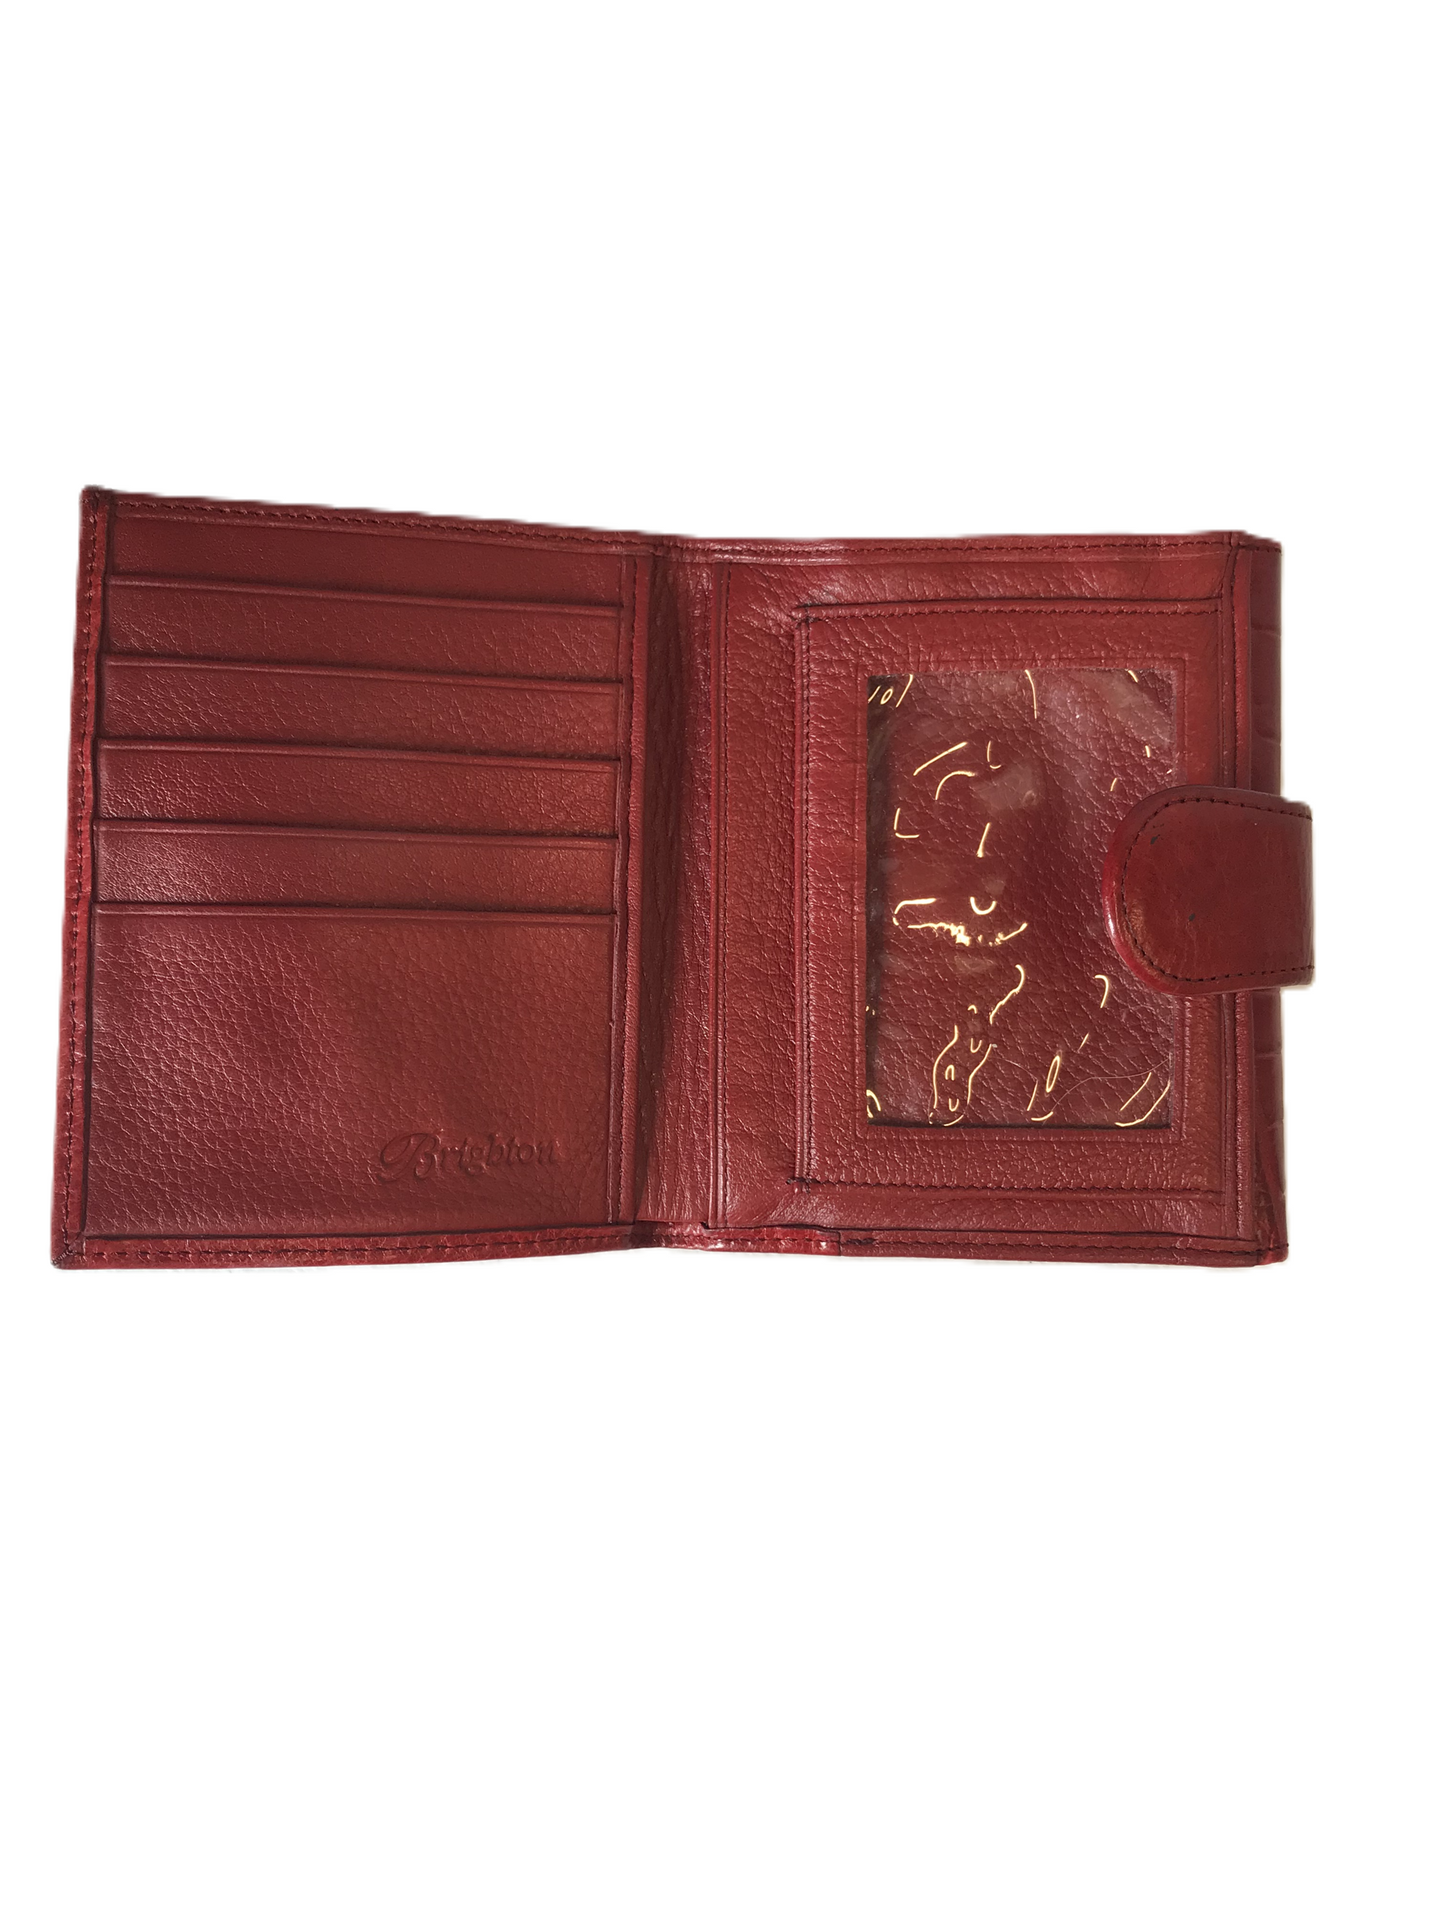 Wallet By Brighton, Size: Small